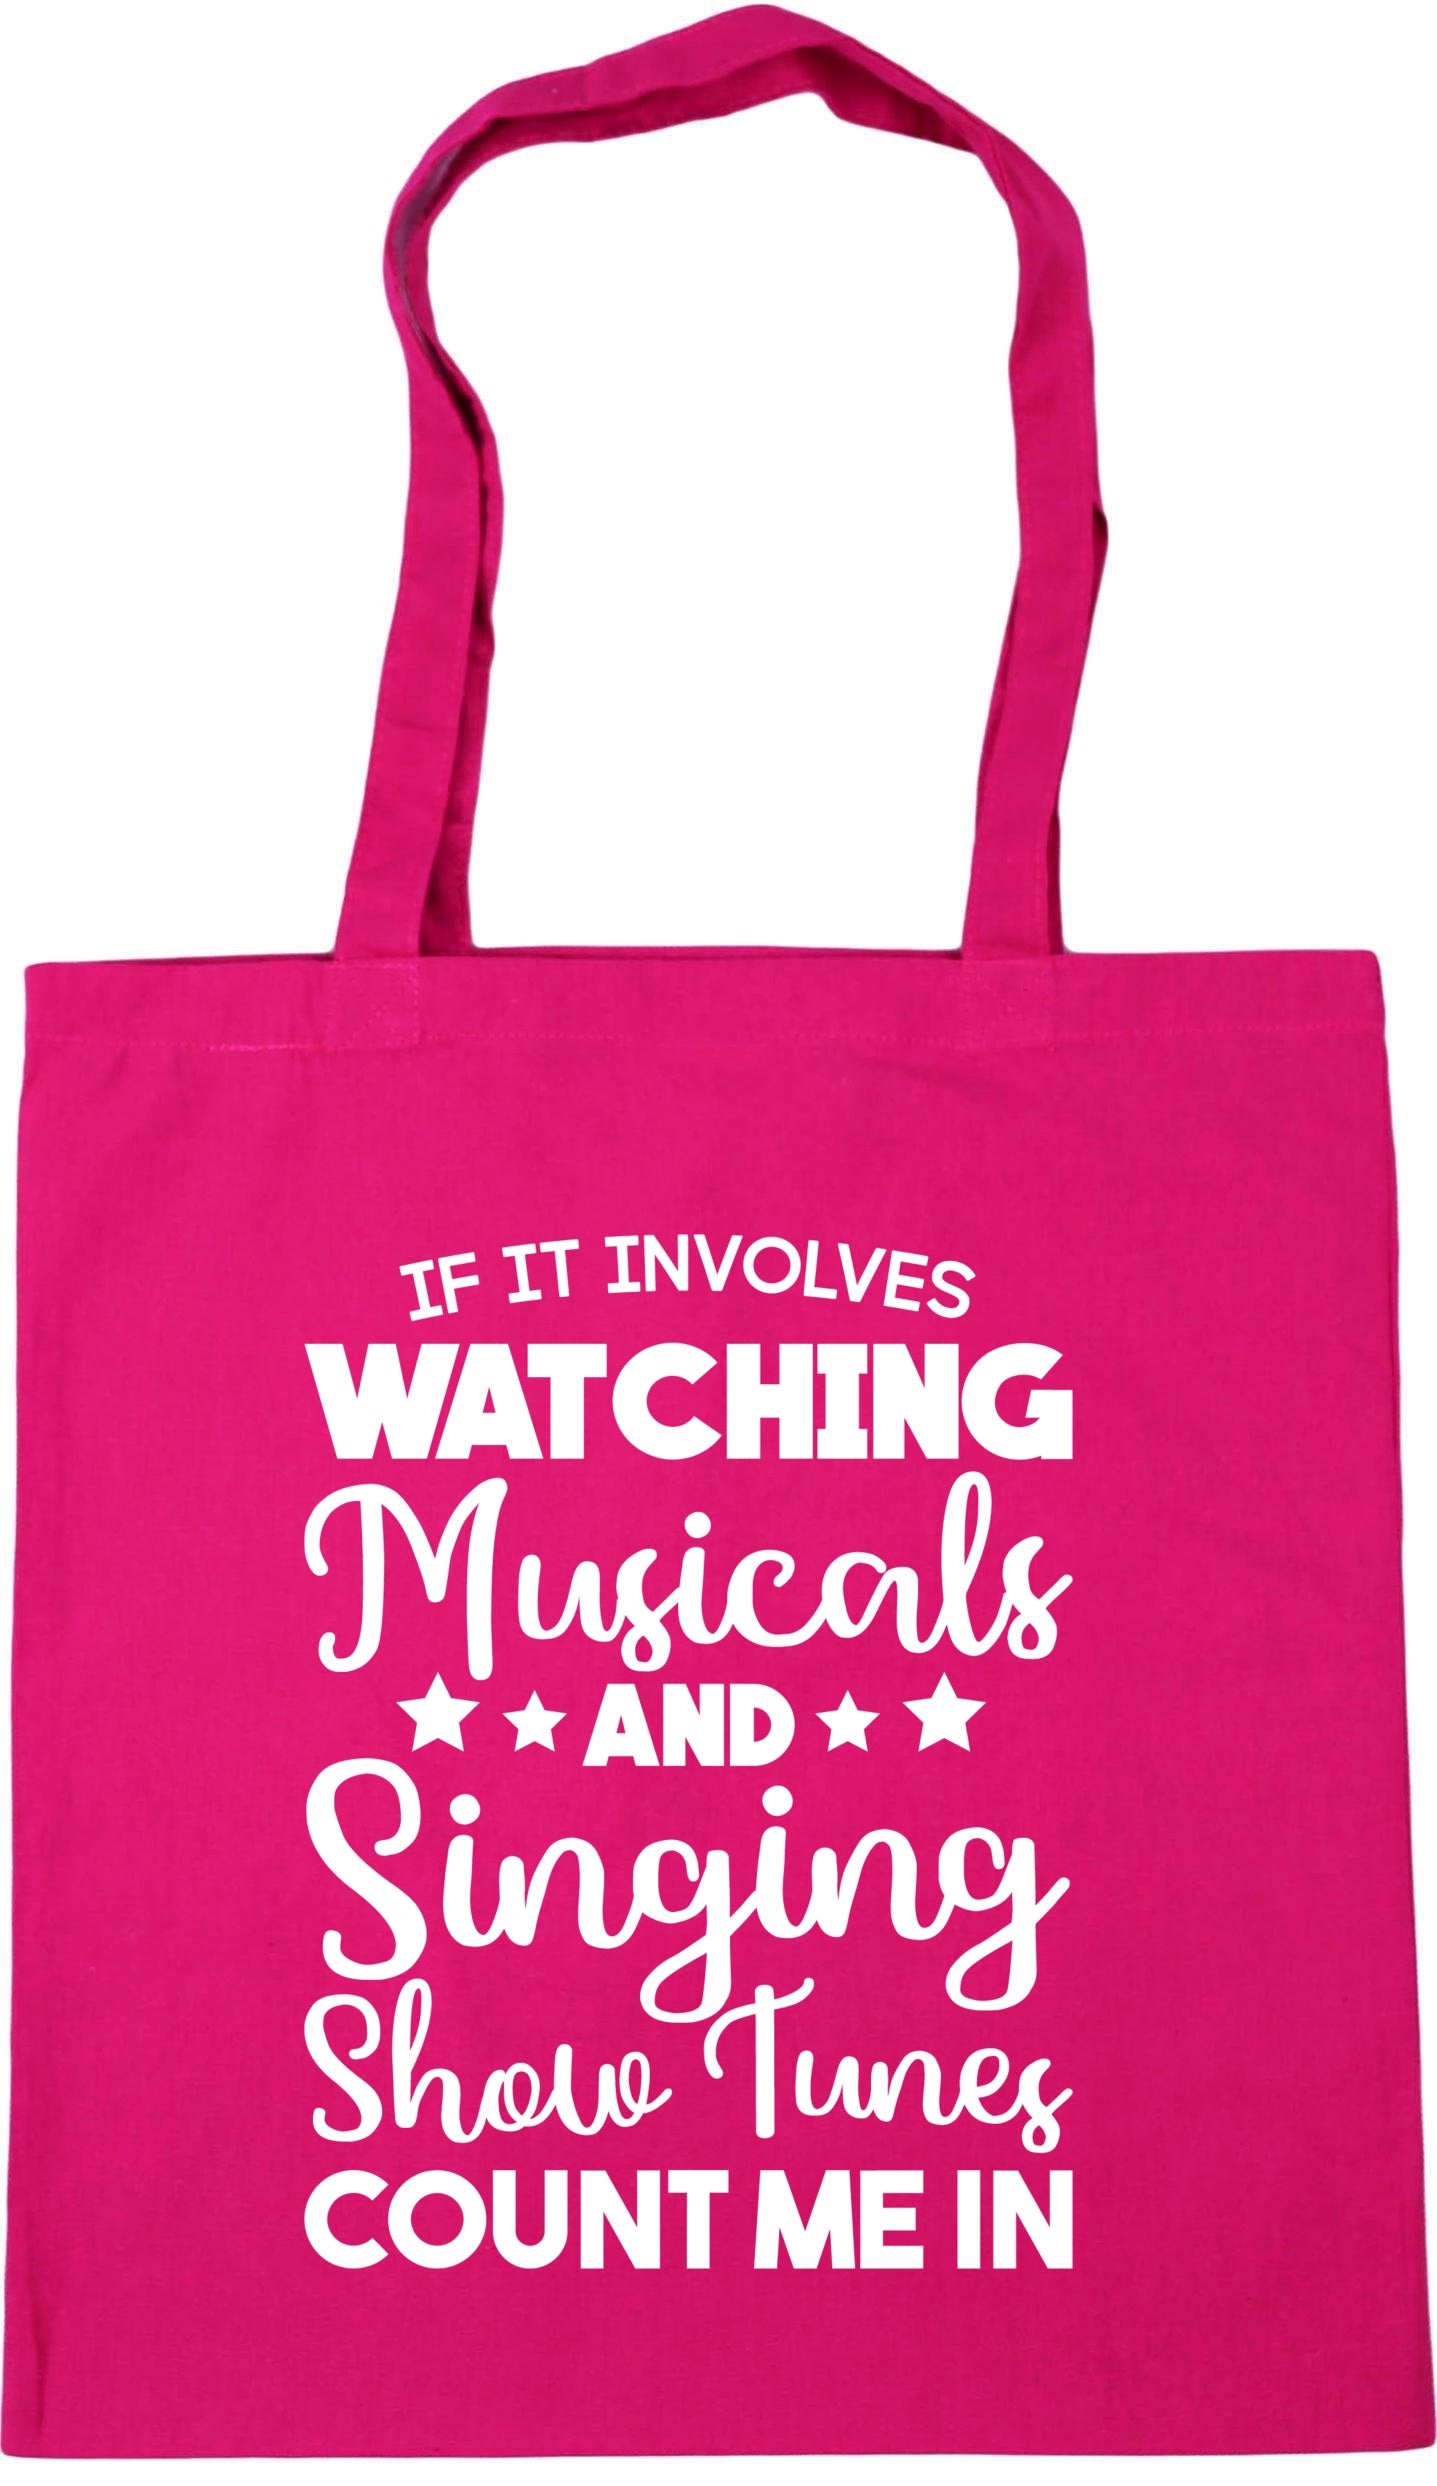 If It Involves Watching Musicals & Singing Show Tunes Count Me In Tote Bag